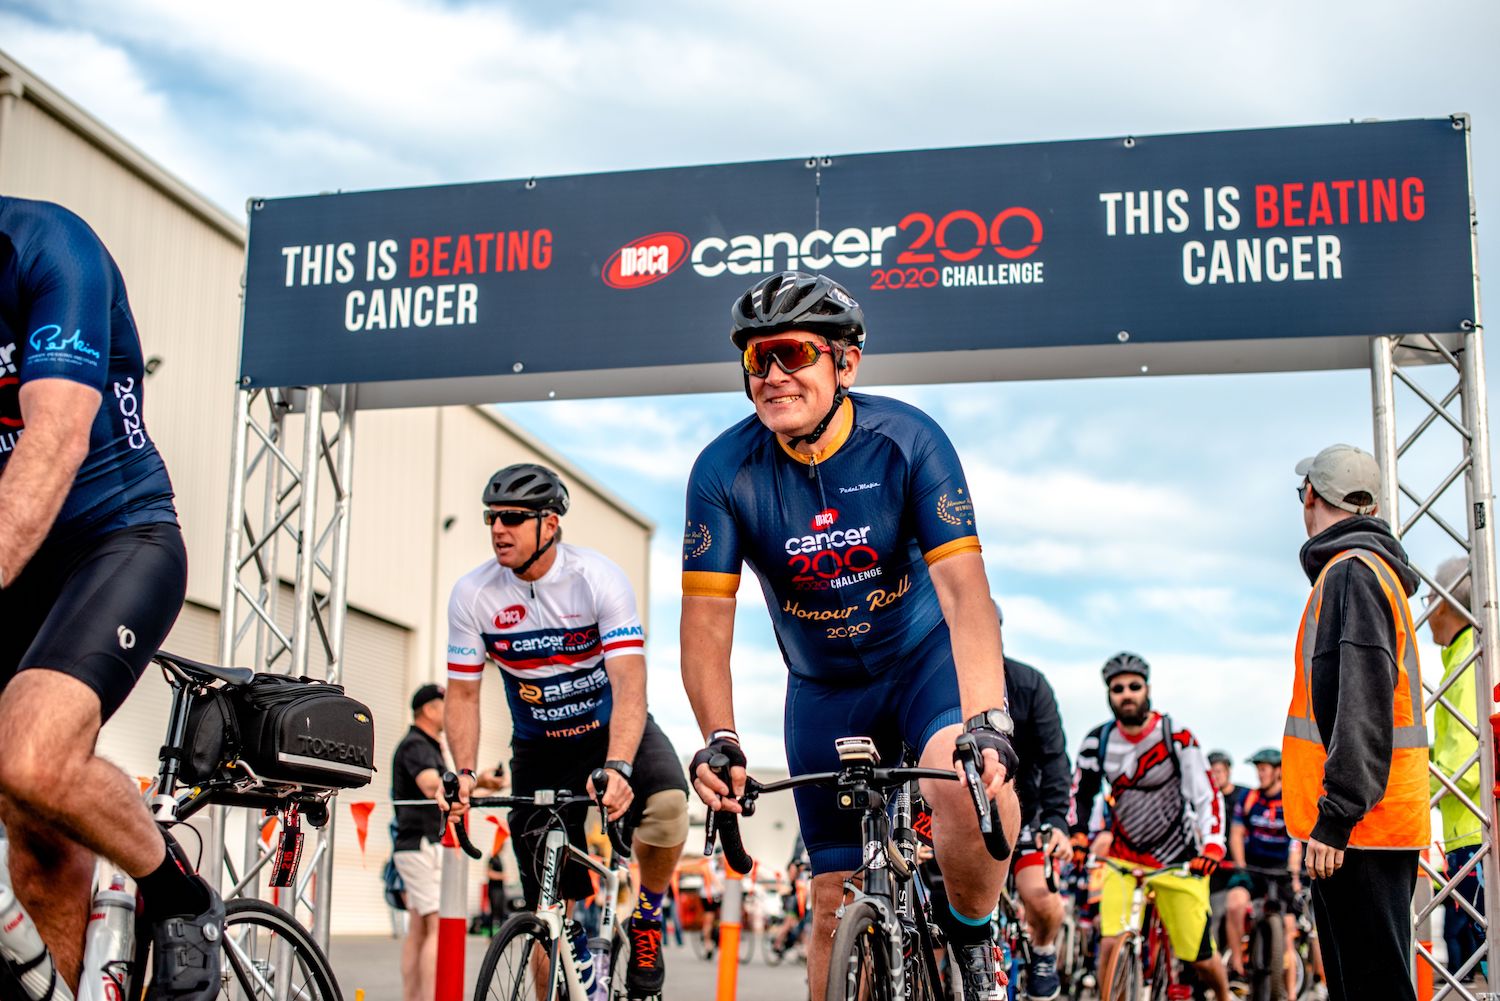 Thousands take part in the MACA Cancer 200 - Harry Perkins Institute of  Medical Research